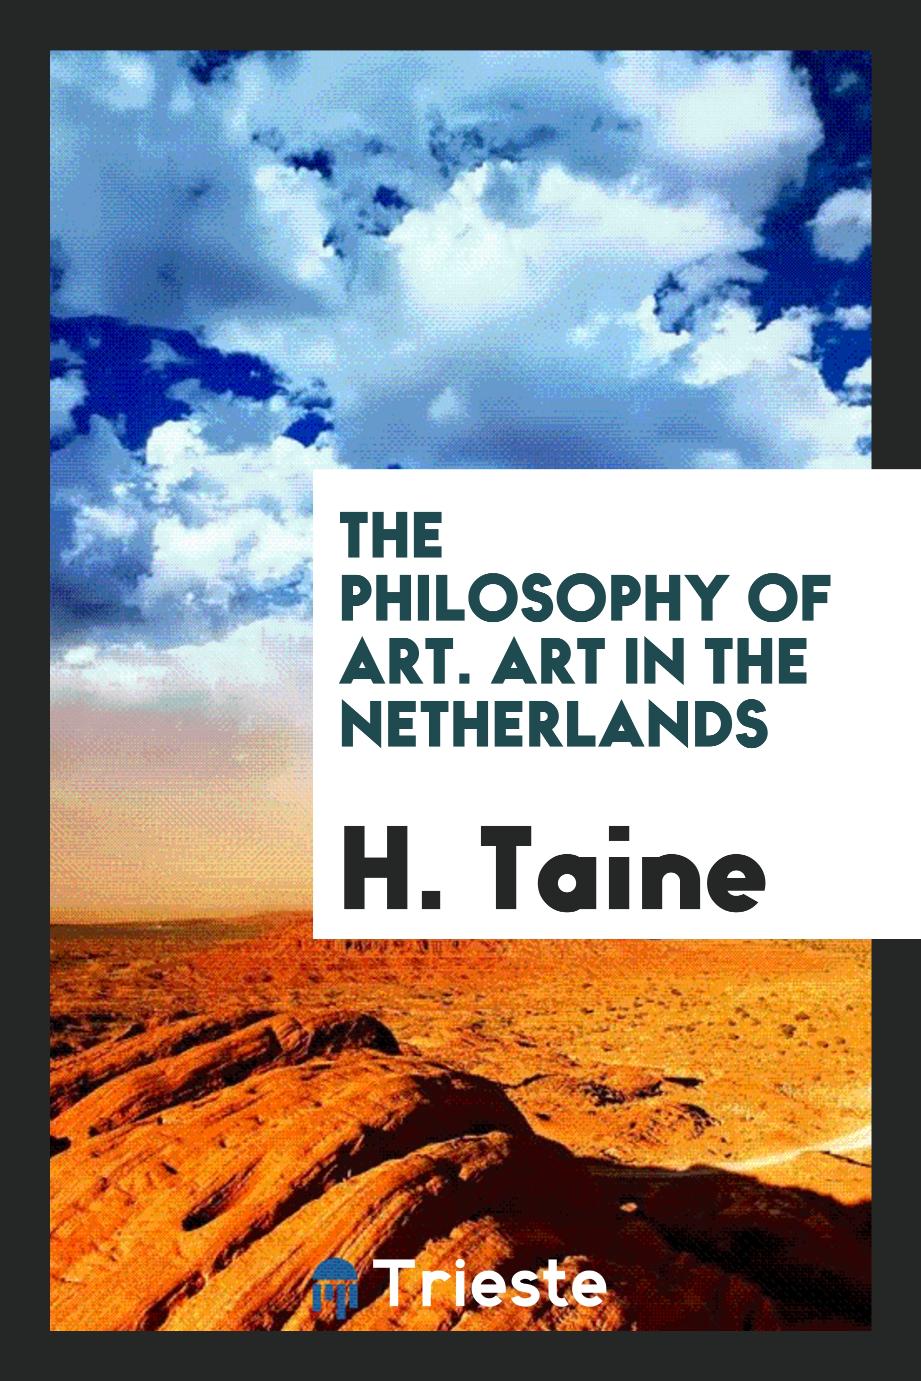 The philosophy of art. Art in the Netherlands